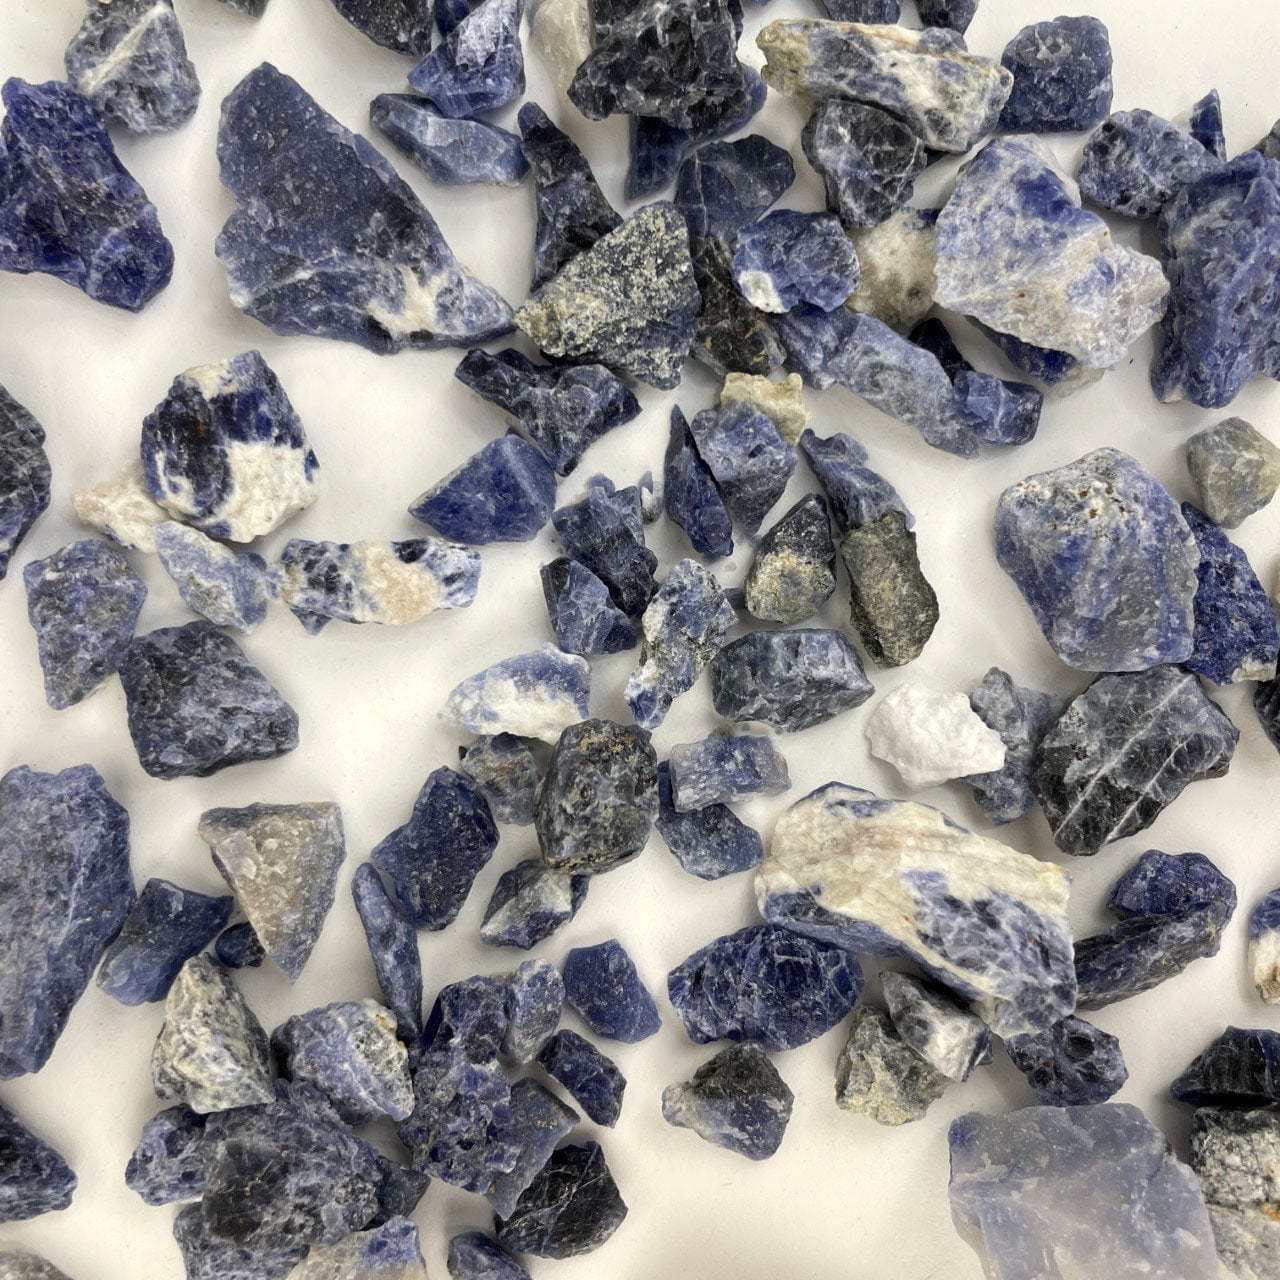 Sodalite Stones  spread out on a table